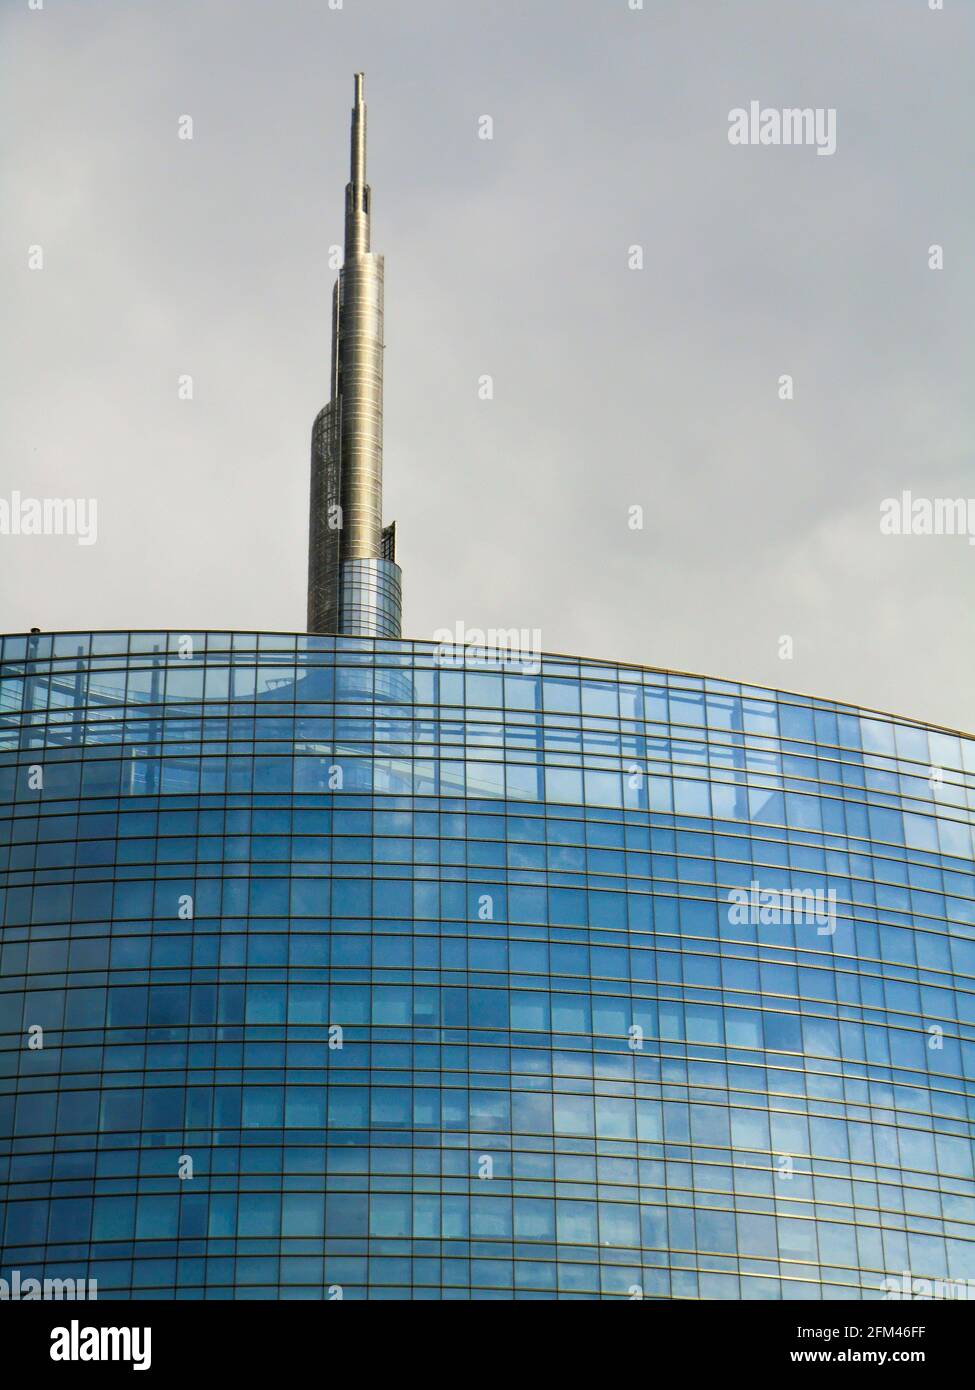 Detail of the Unicredit Tower, Piazza Gae Aulenti, Milano, Milan, Lombardy, Italy, Europe Stock Photo